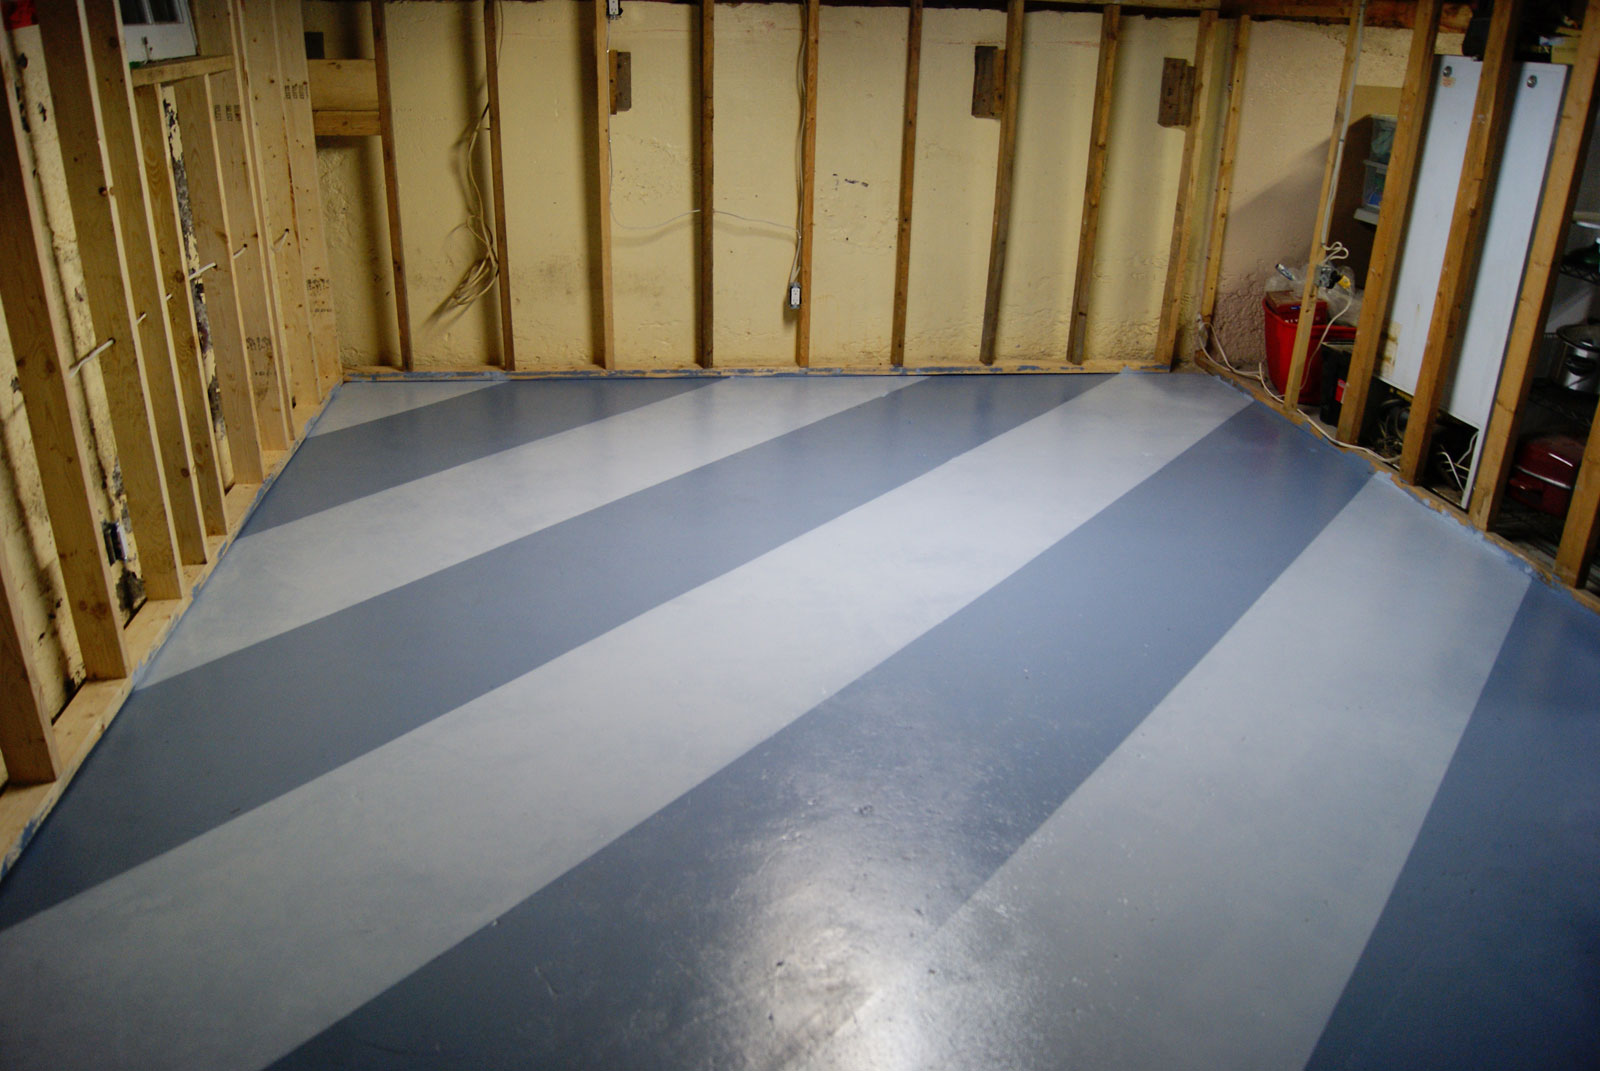 Basement Floor Mix Painting Basement Floor With Color Mix Finished With Best Color Made From Wooden Material For Idea Decoration  Painting Basement Floor For The Least Expensive Solution 